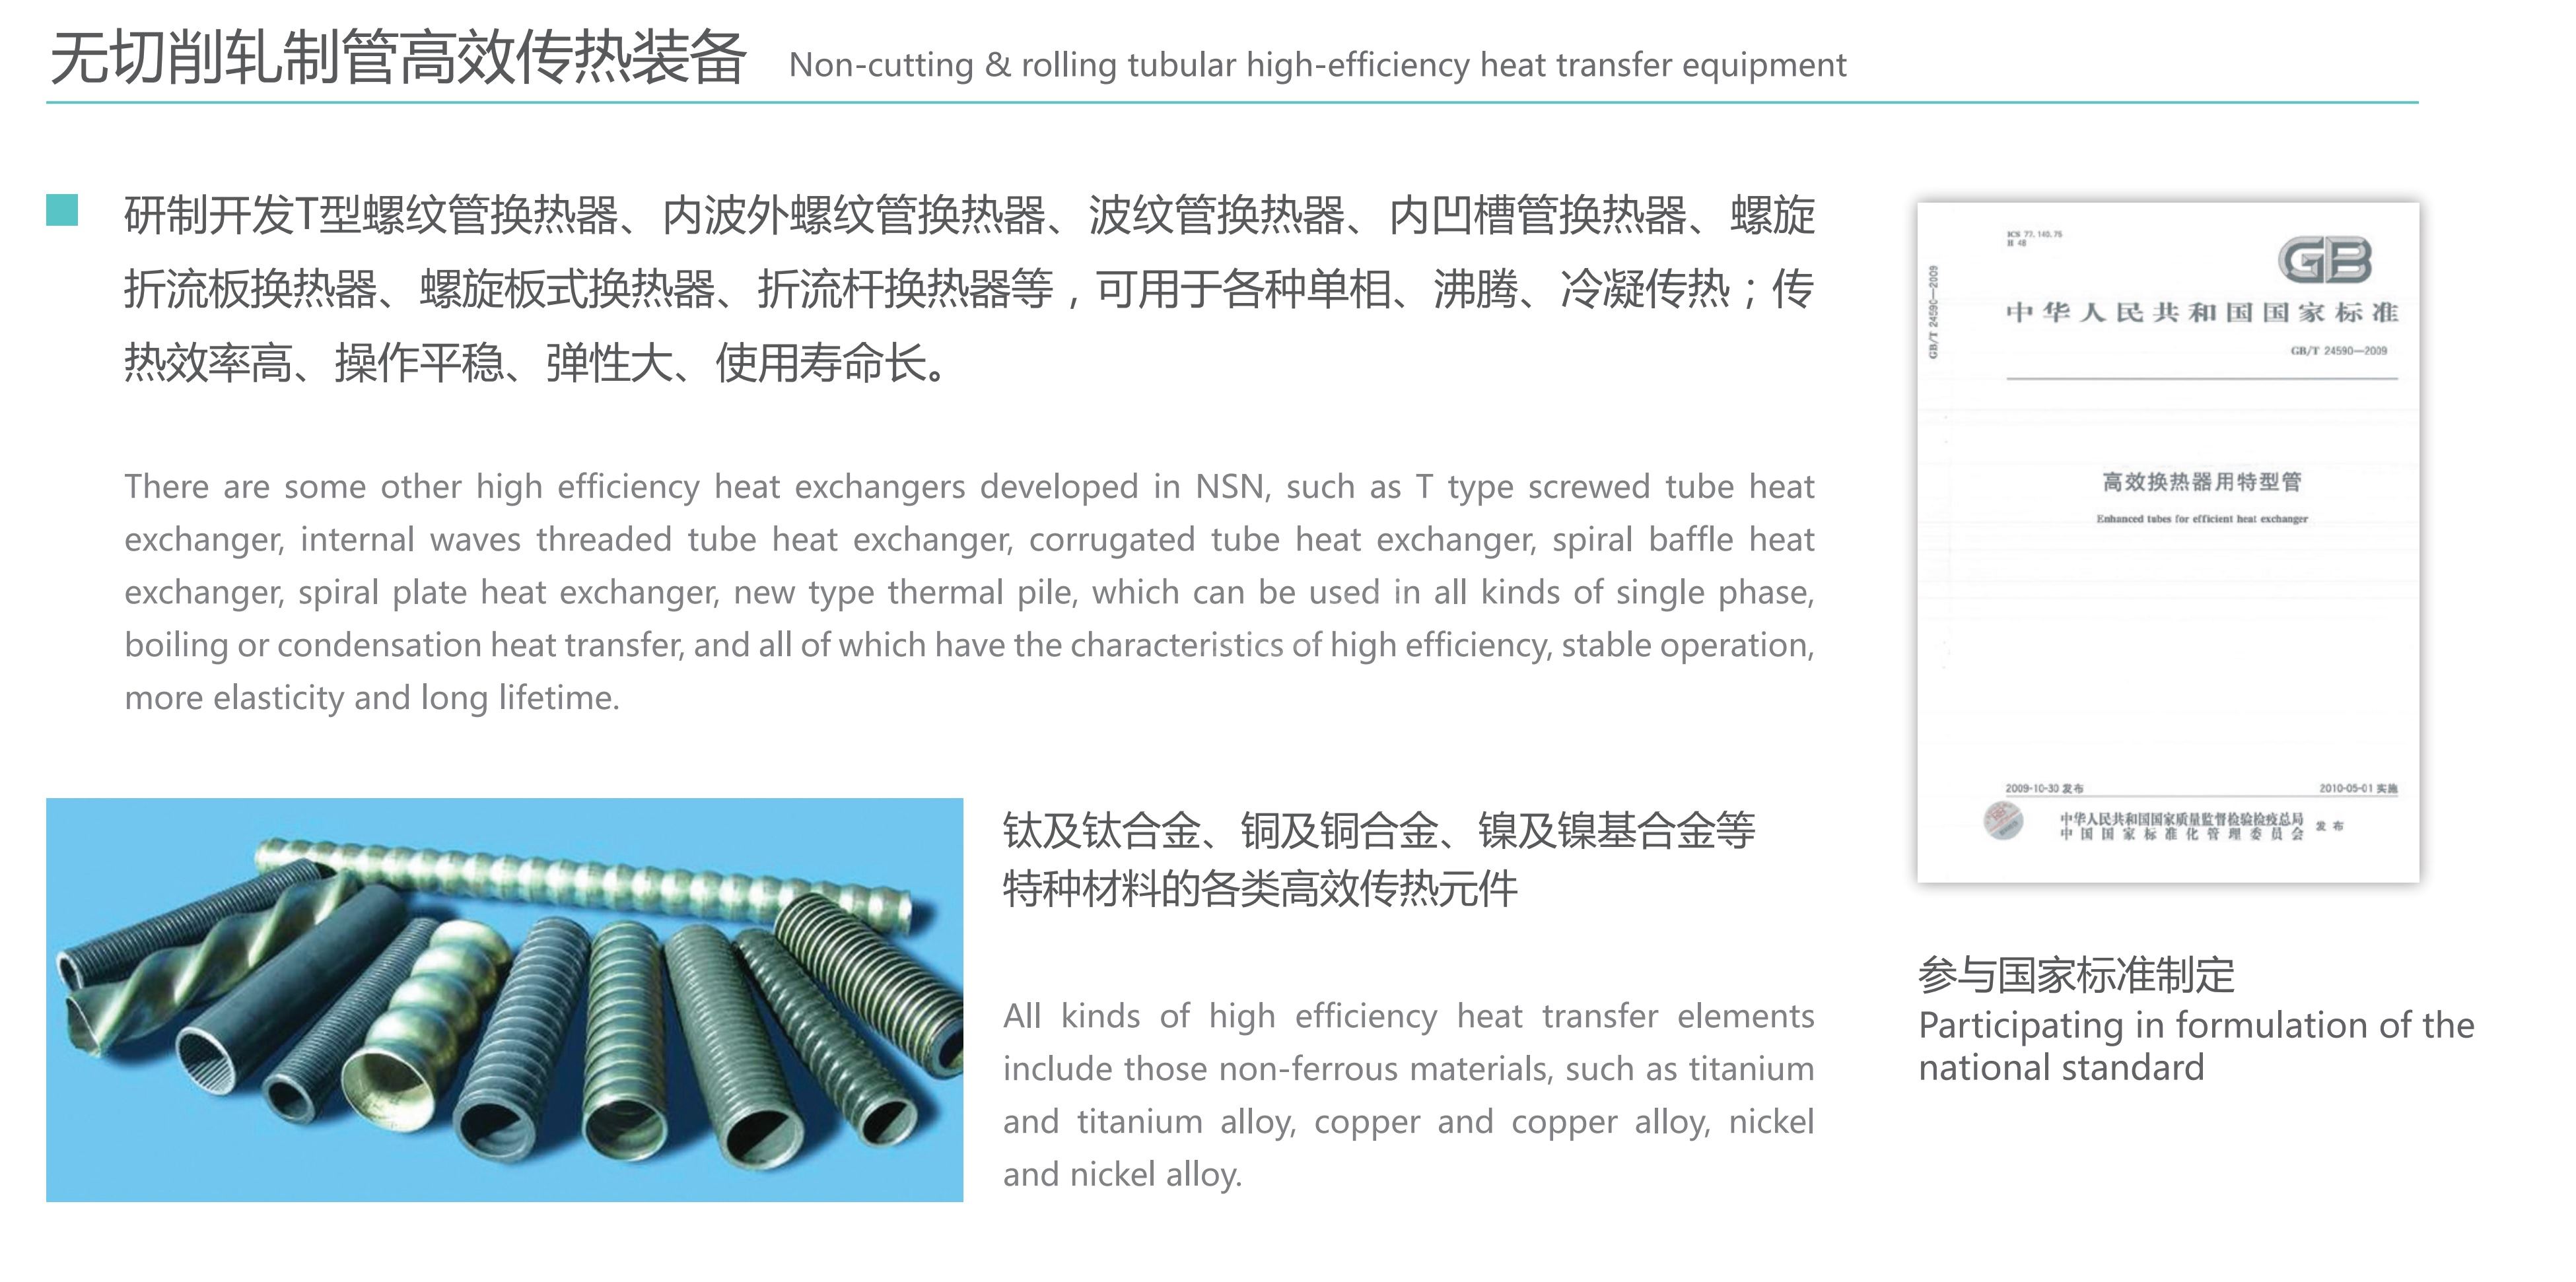 Efficient heat transfer equipment for non-cutting rolled pipes